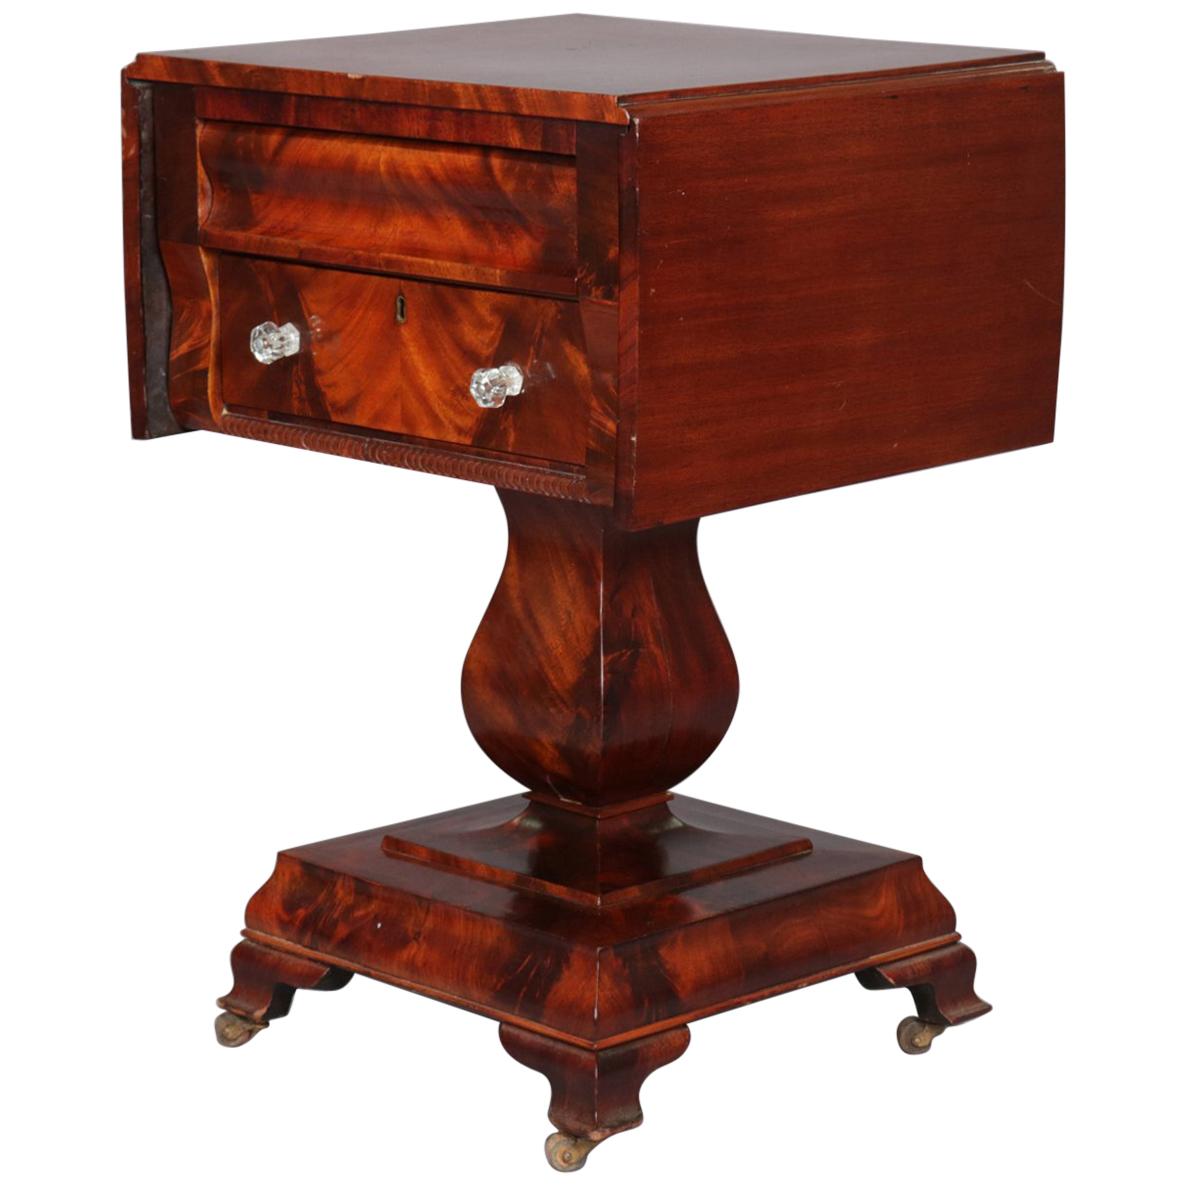 Antique American Empire Flame Mahogany Two-Drawer Drop-Leaf Sewing Stand